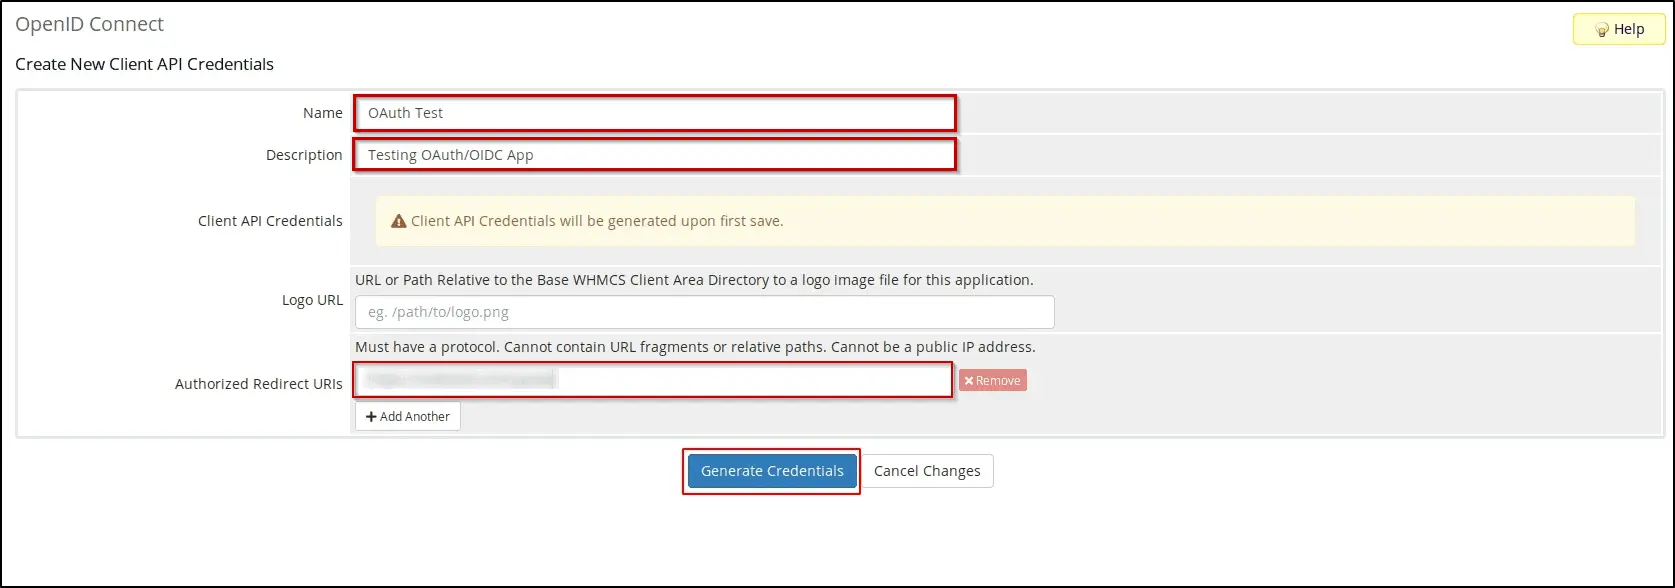 Drupal WHMCS OpenID Single Sign-On - Provide the required details like Name, Callback URL